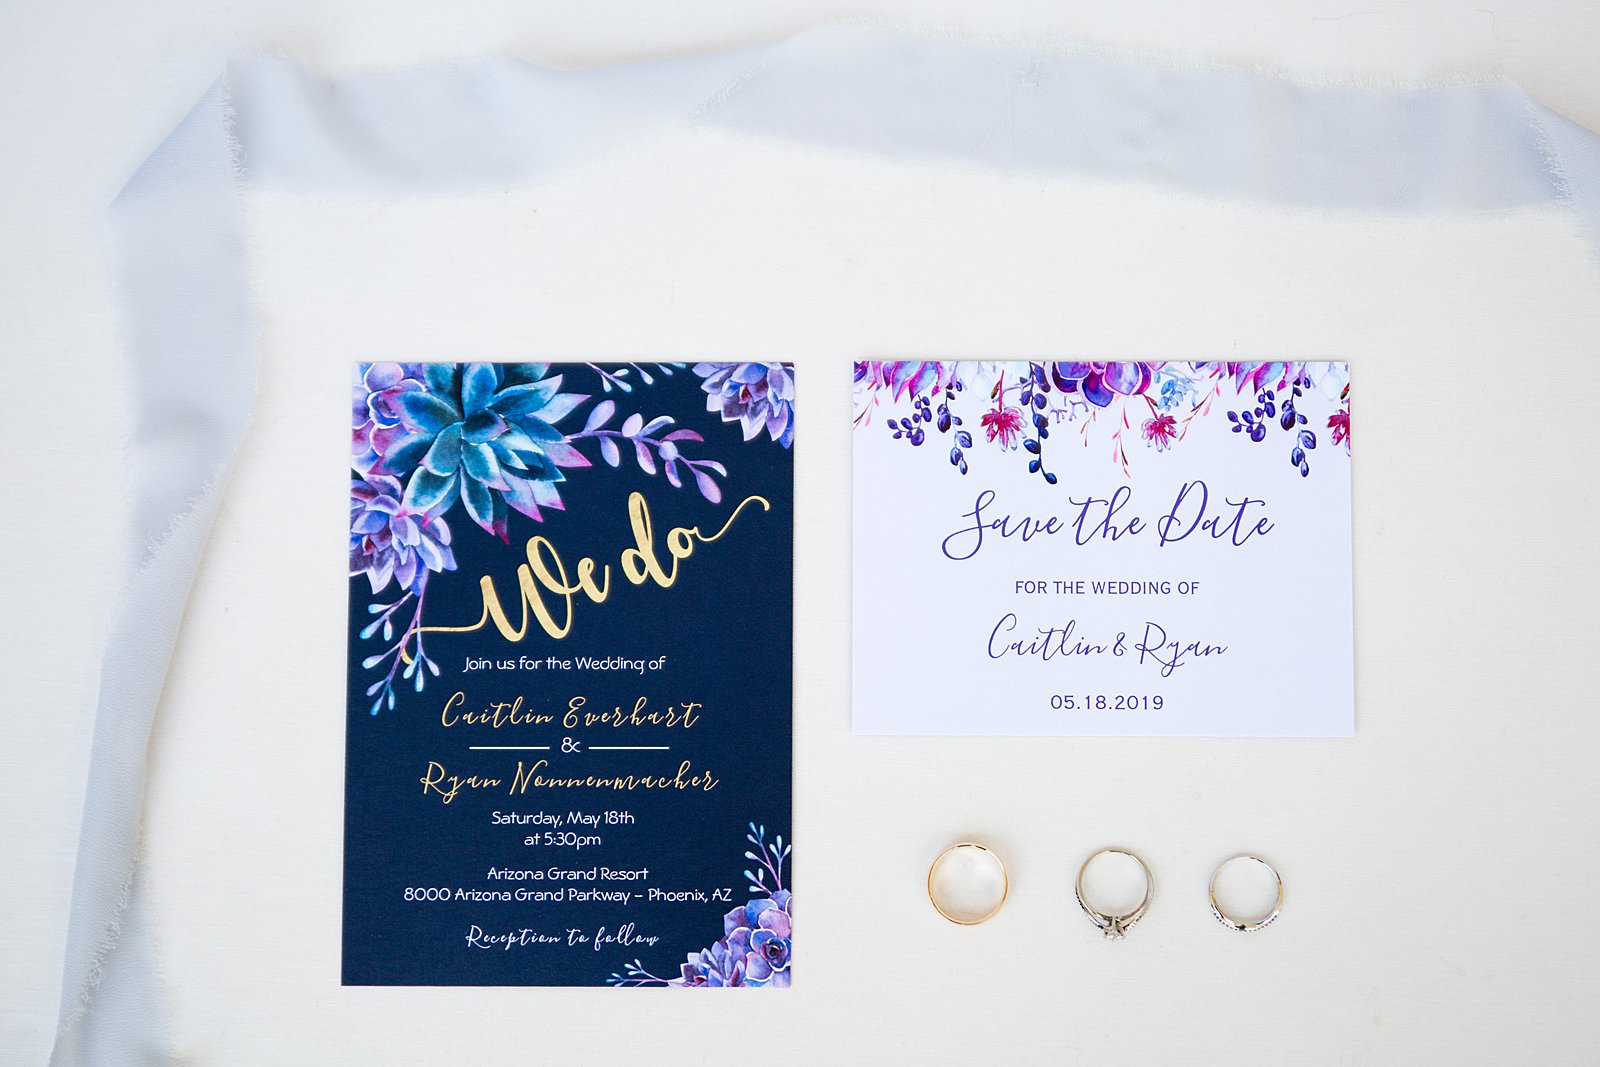 Blue and purple floral wedding stationary by Phoenix wedding photographer PMA Photography.